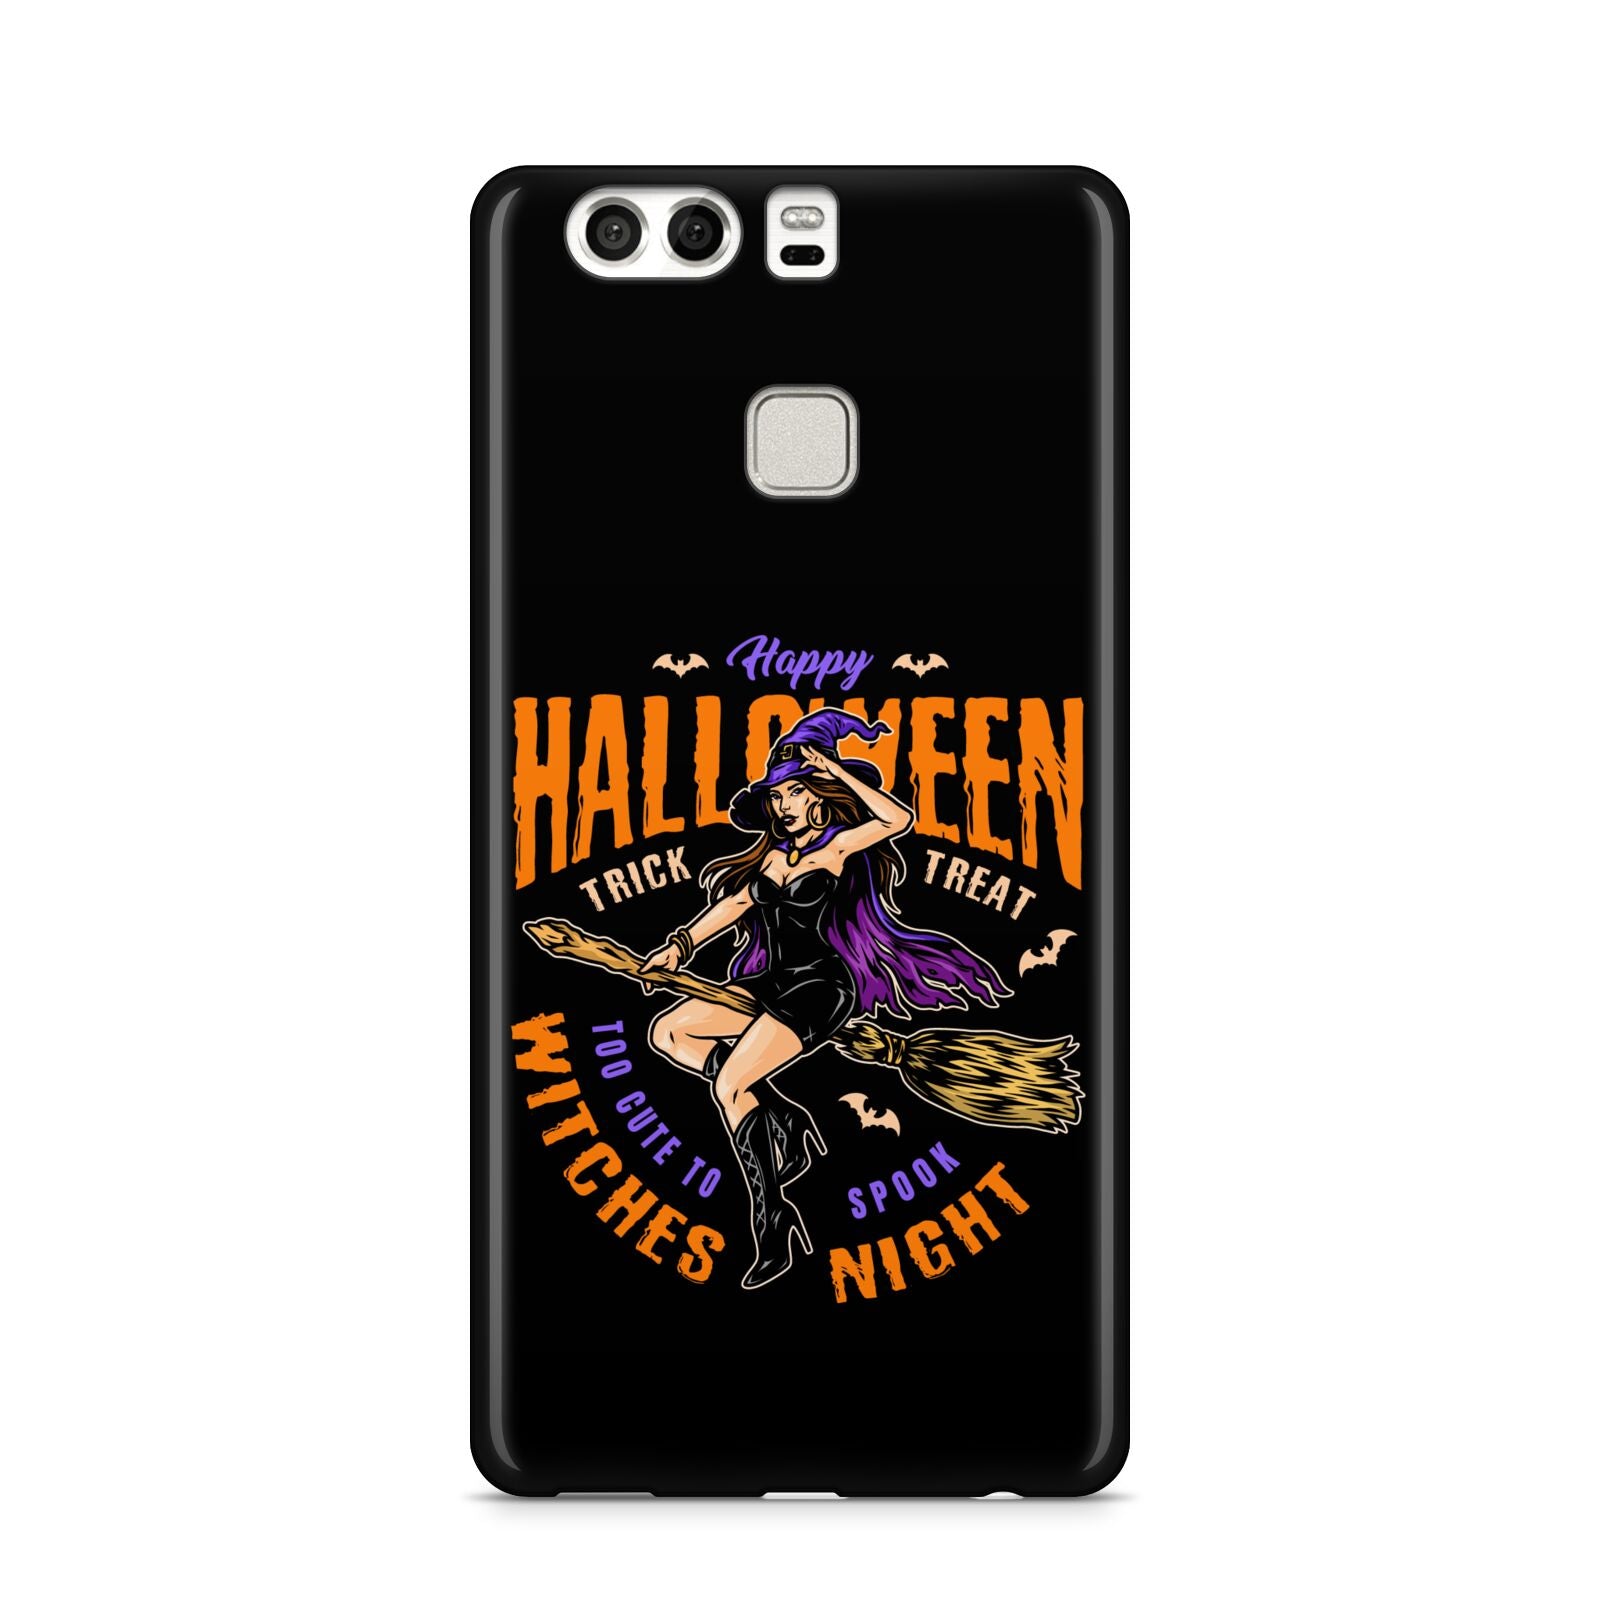 Witches Night Huawei P9 Case